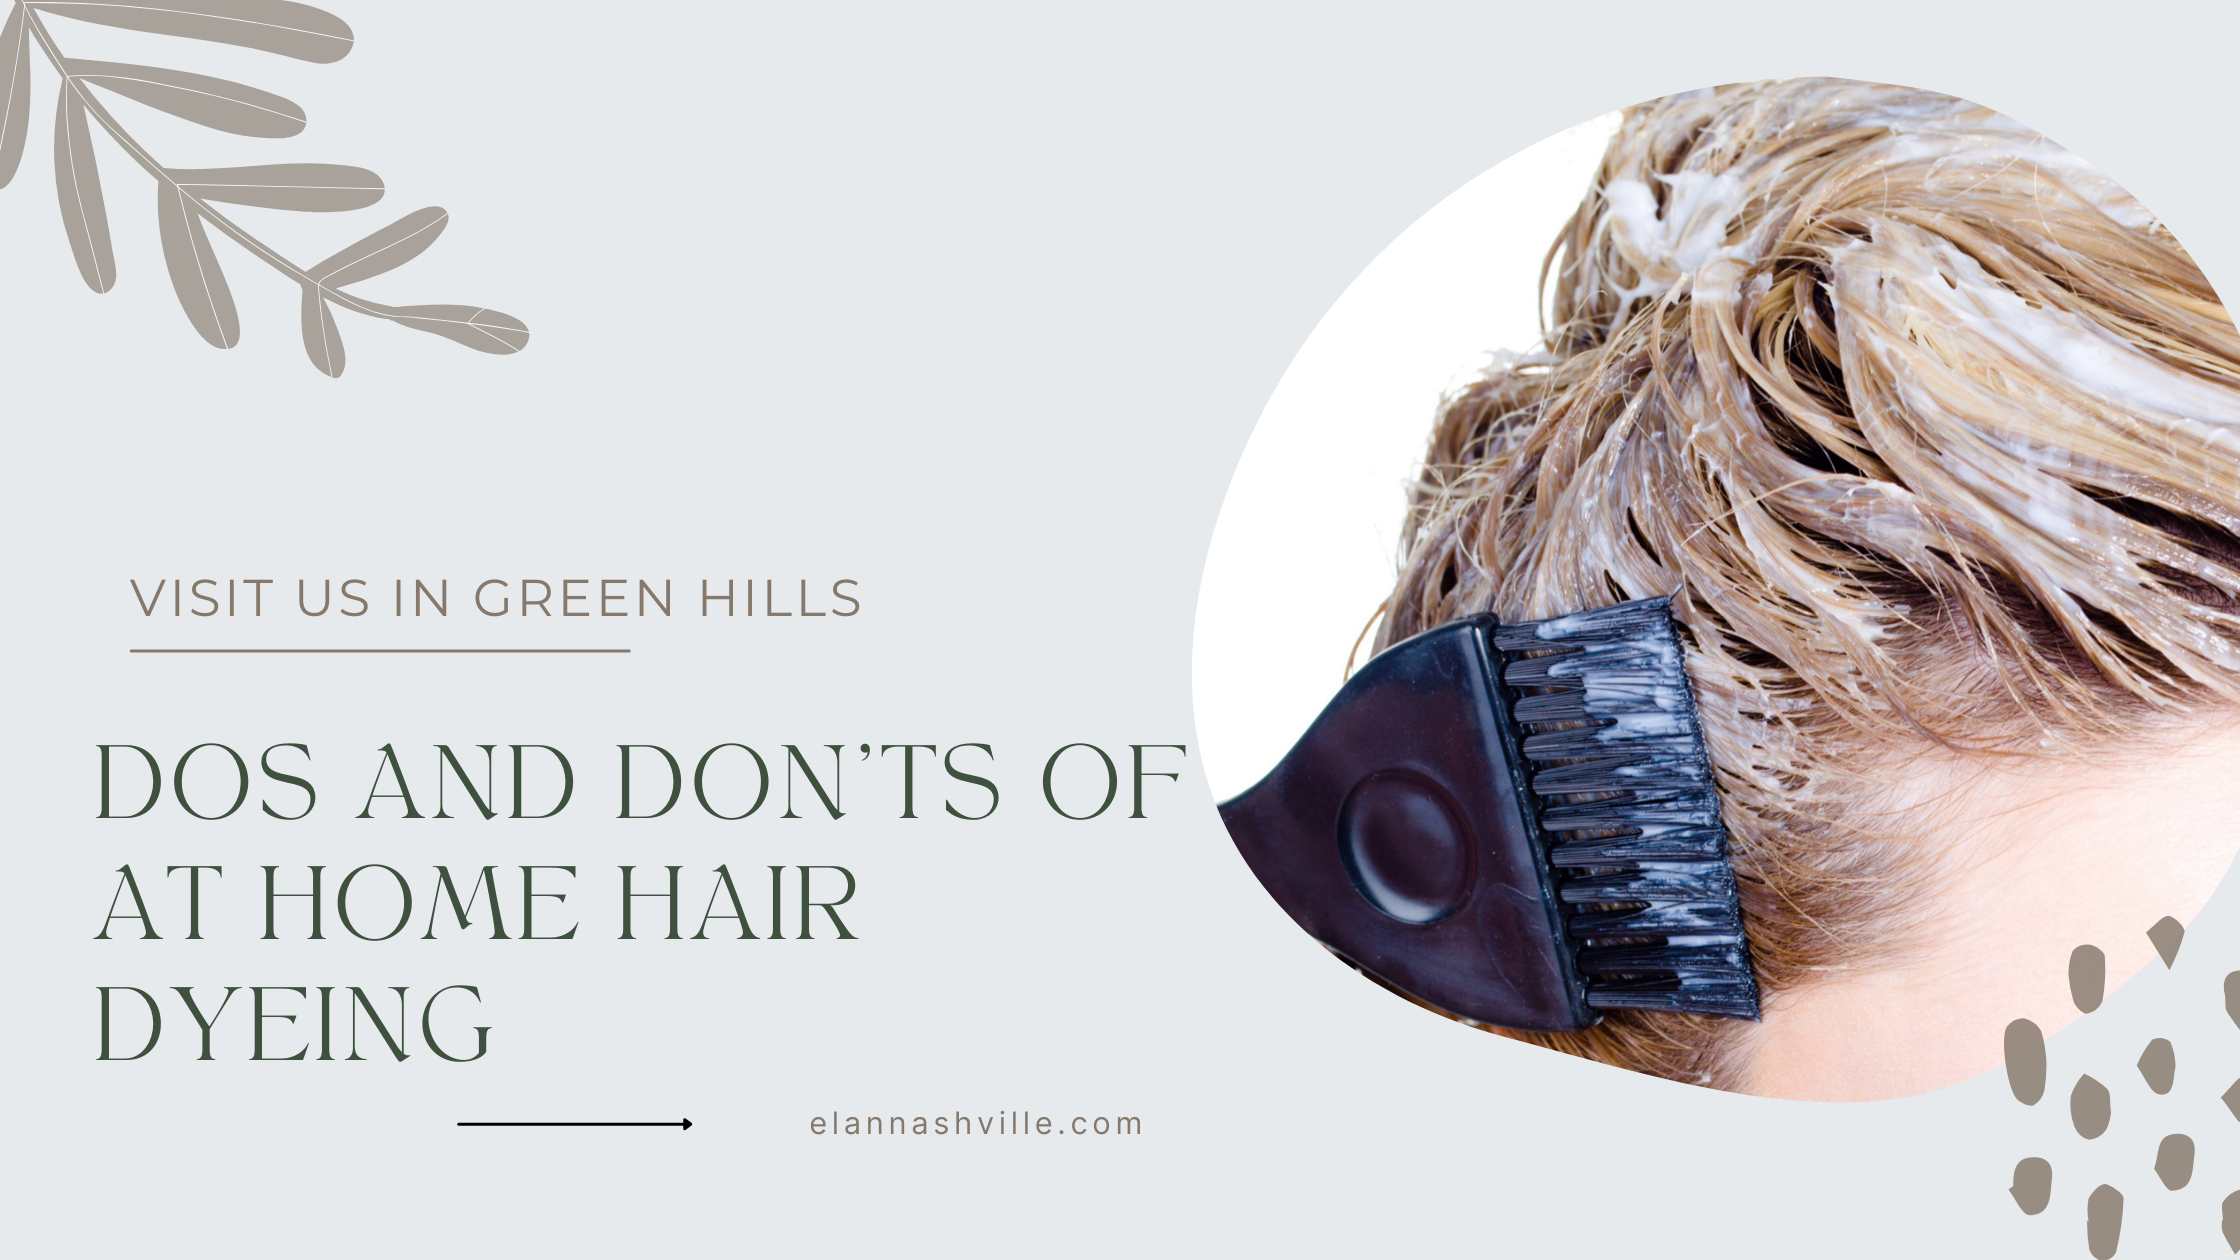 10. The Dos and Don'ts of Dyeing Your Hair Honey Blonde at Home - wide 5